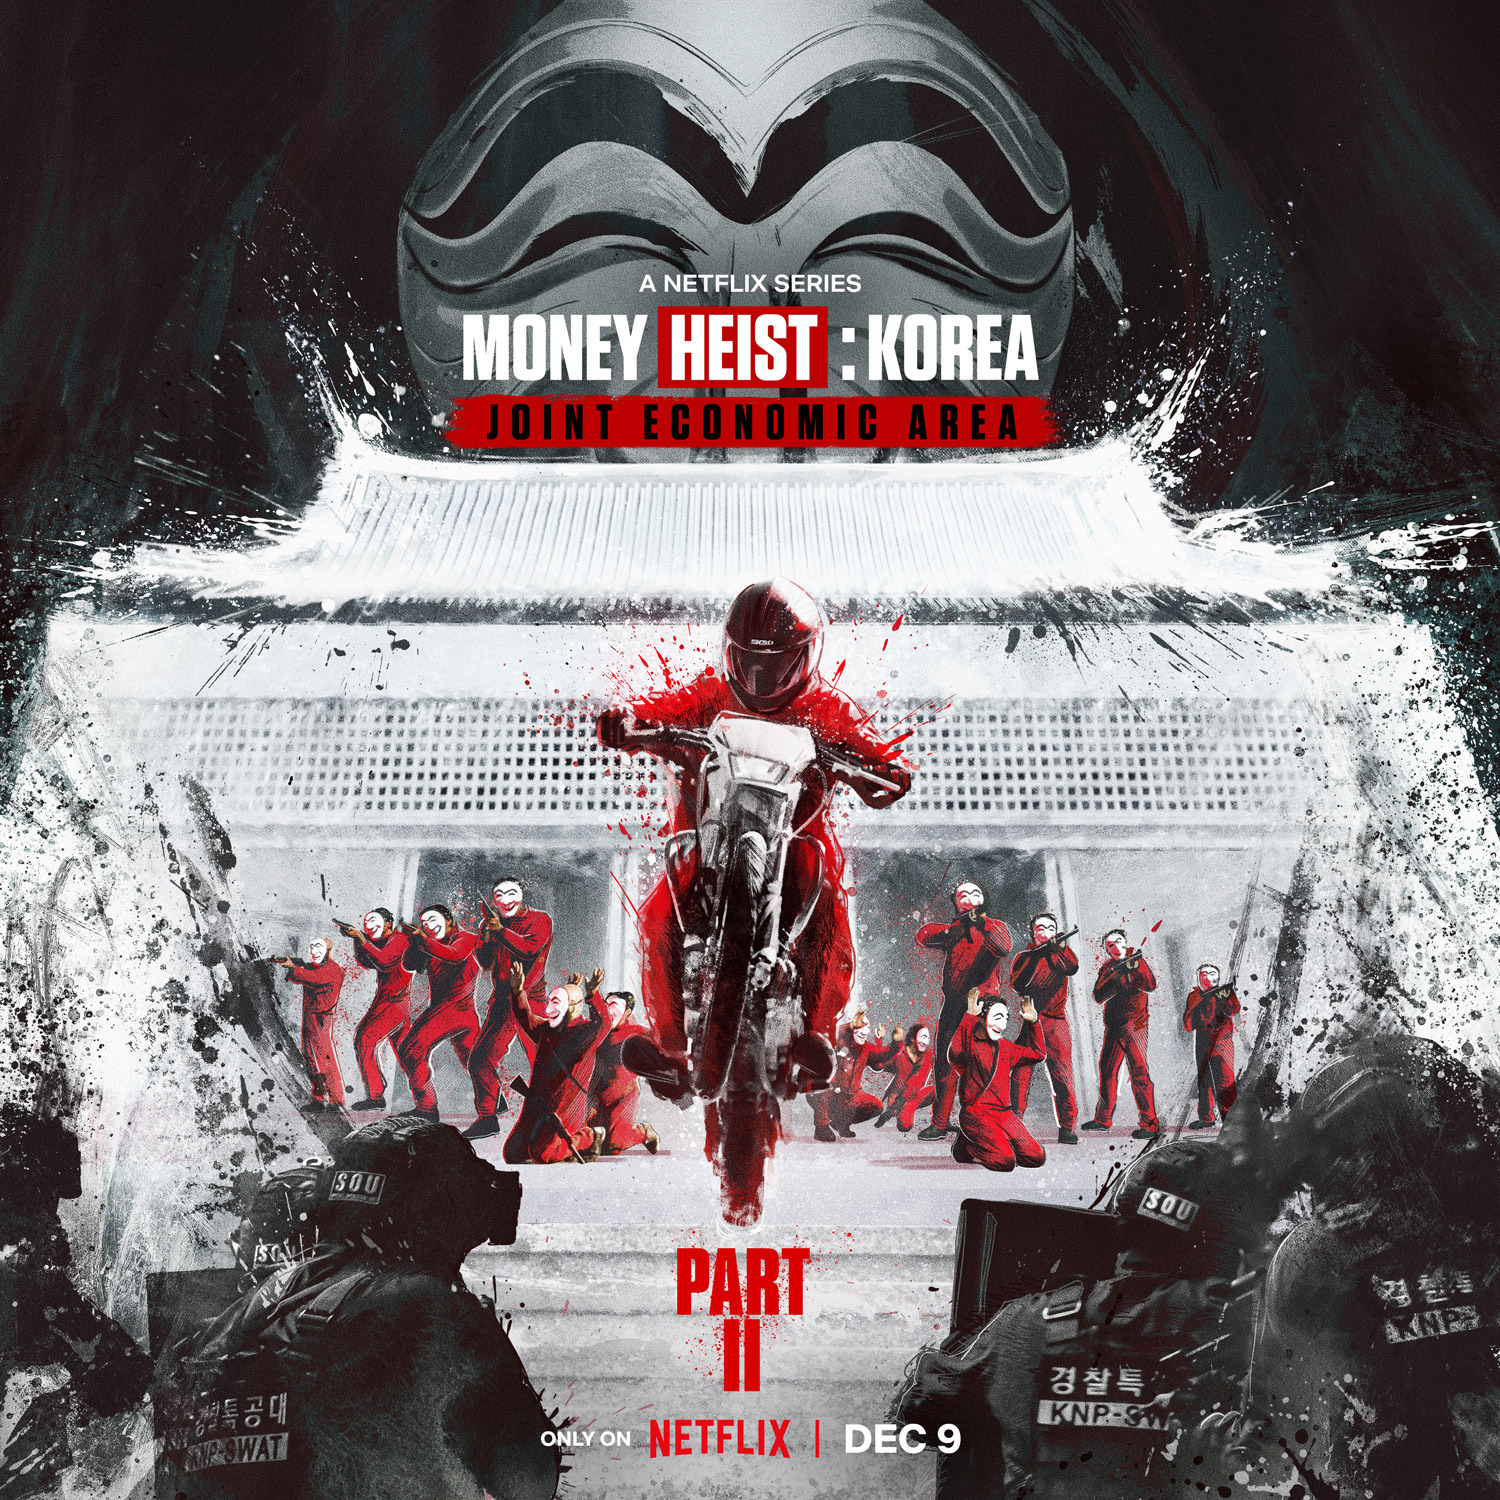 Extra Large TV Poster Image for Money Heist: Korea - Joint Economic Area (#12 of 12)